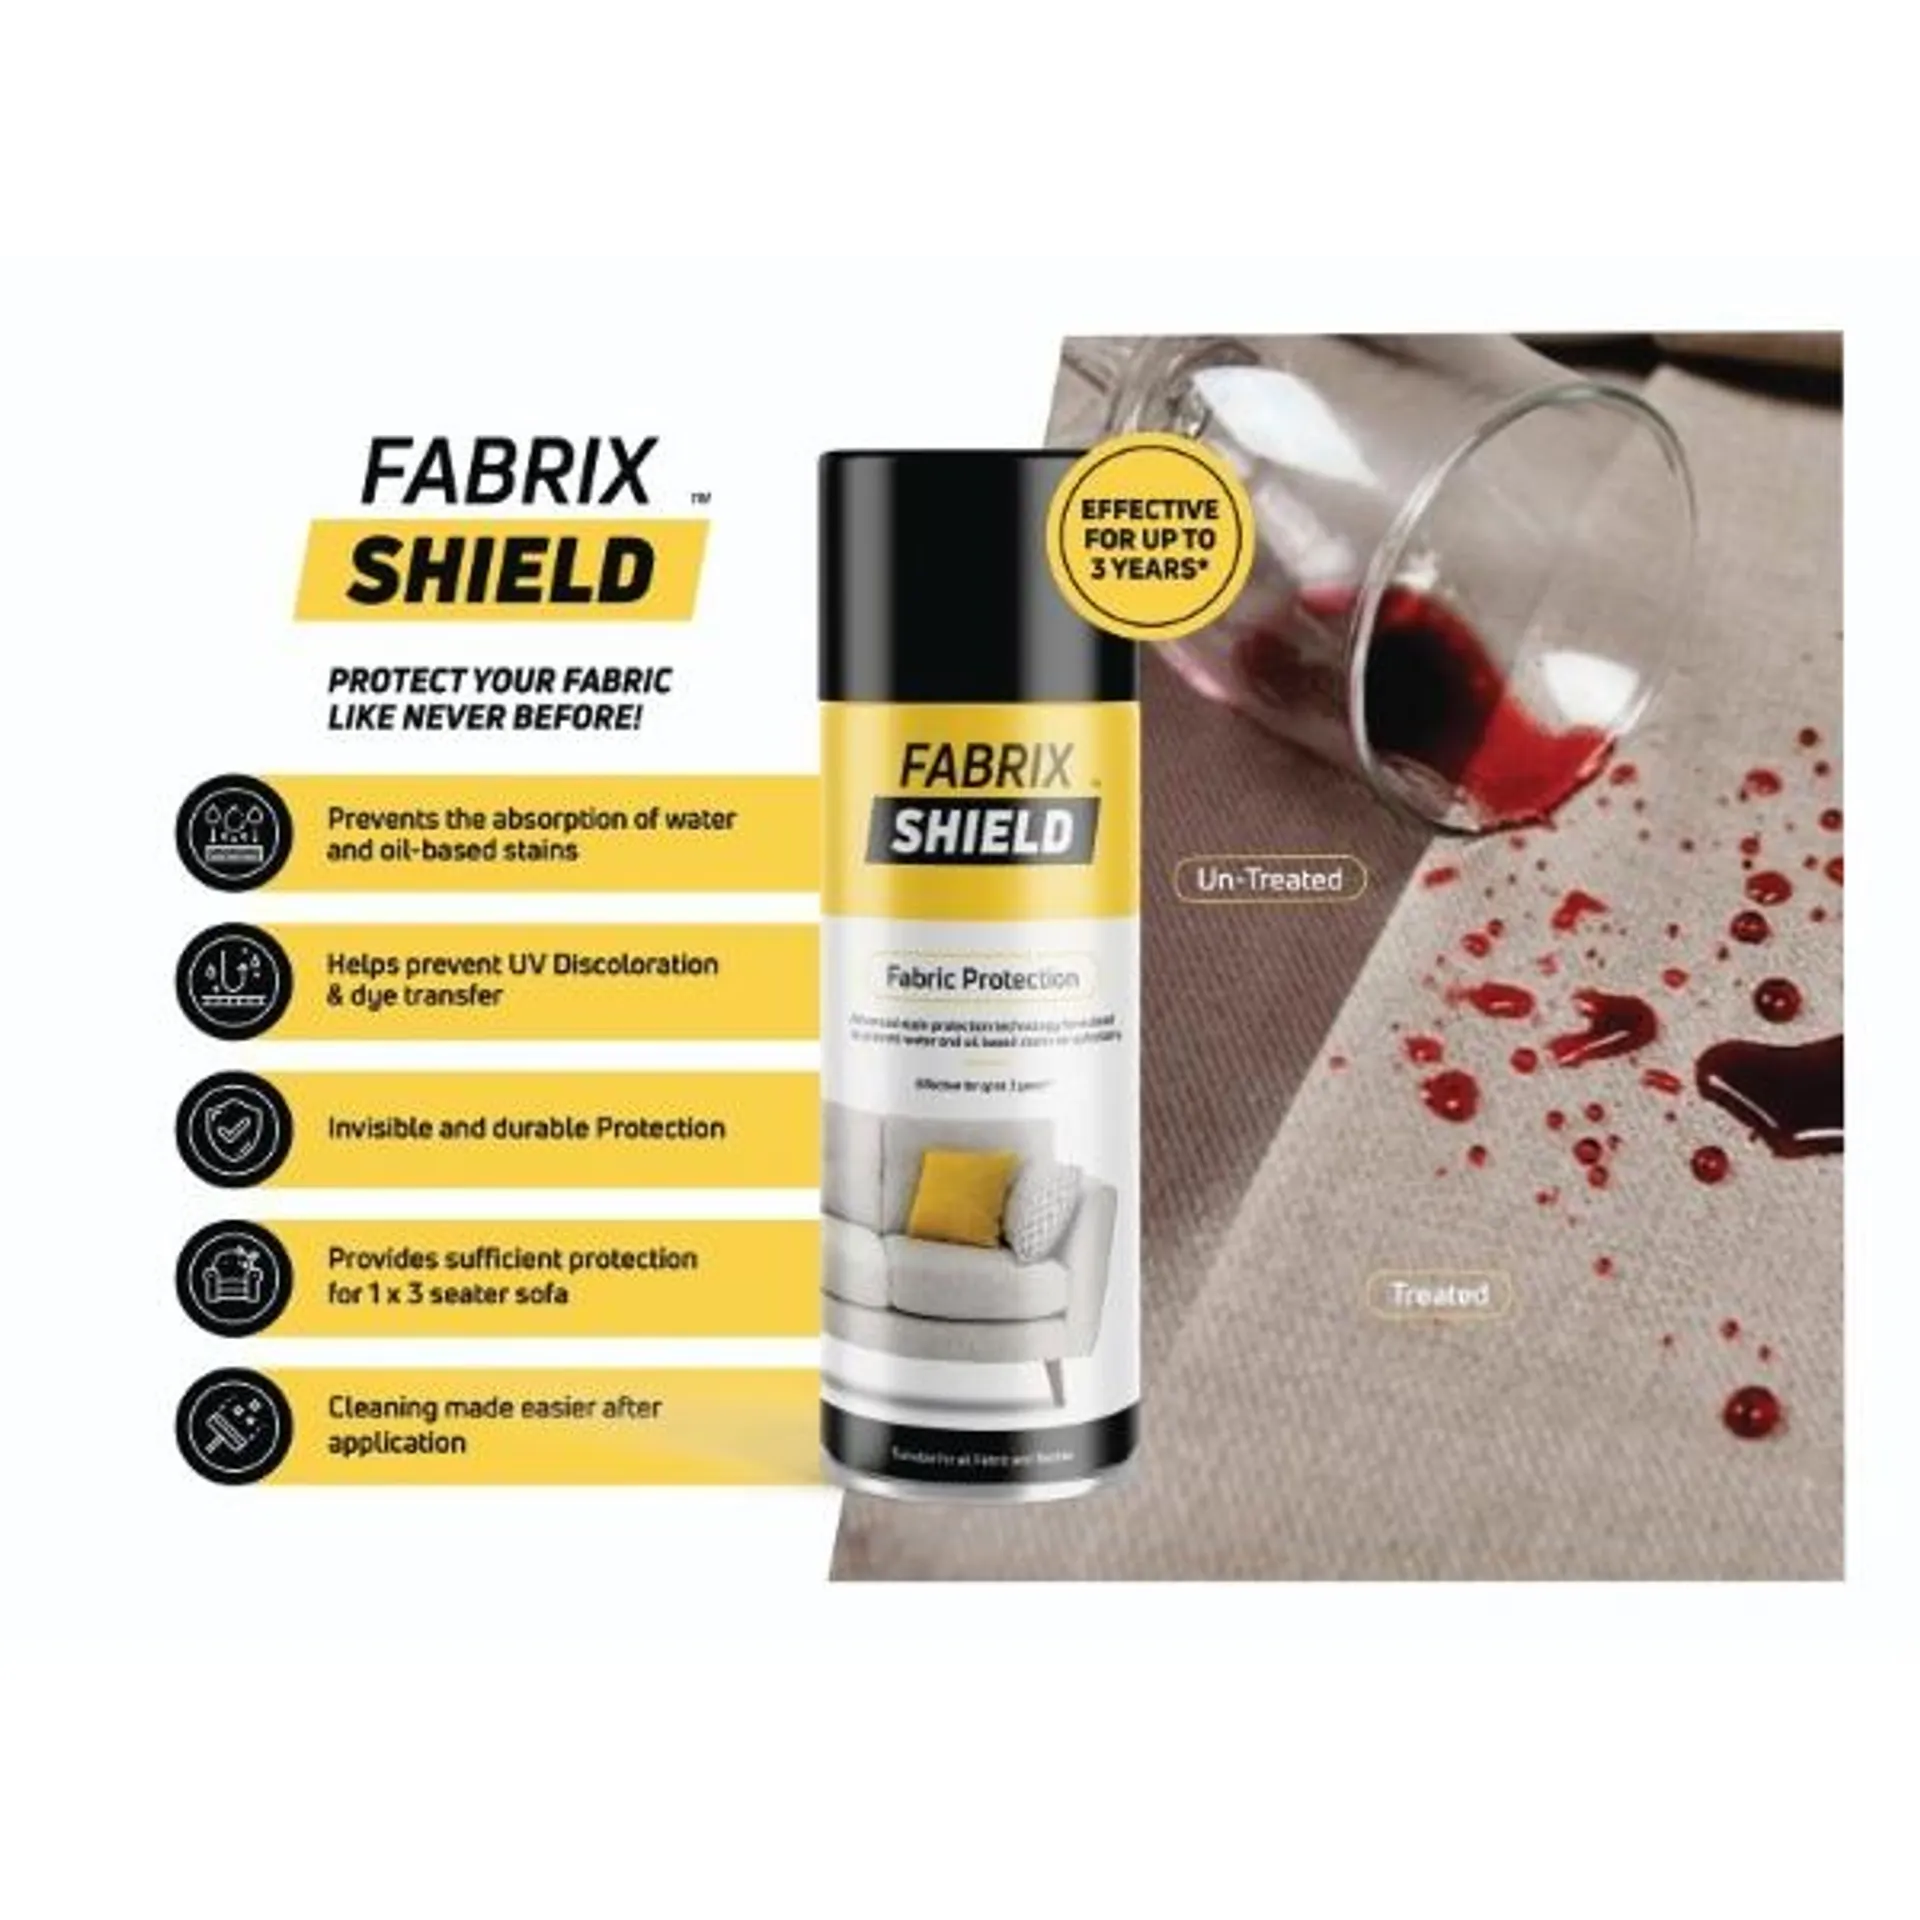 Fabrix Shield Fabric Protection